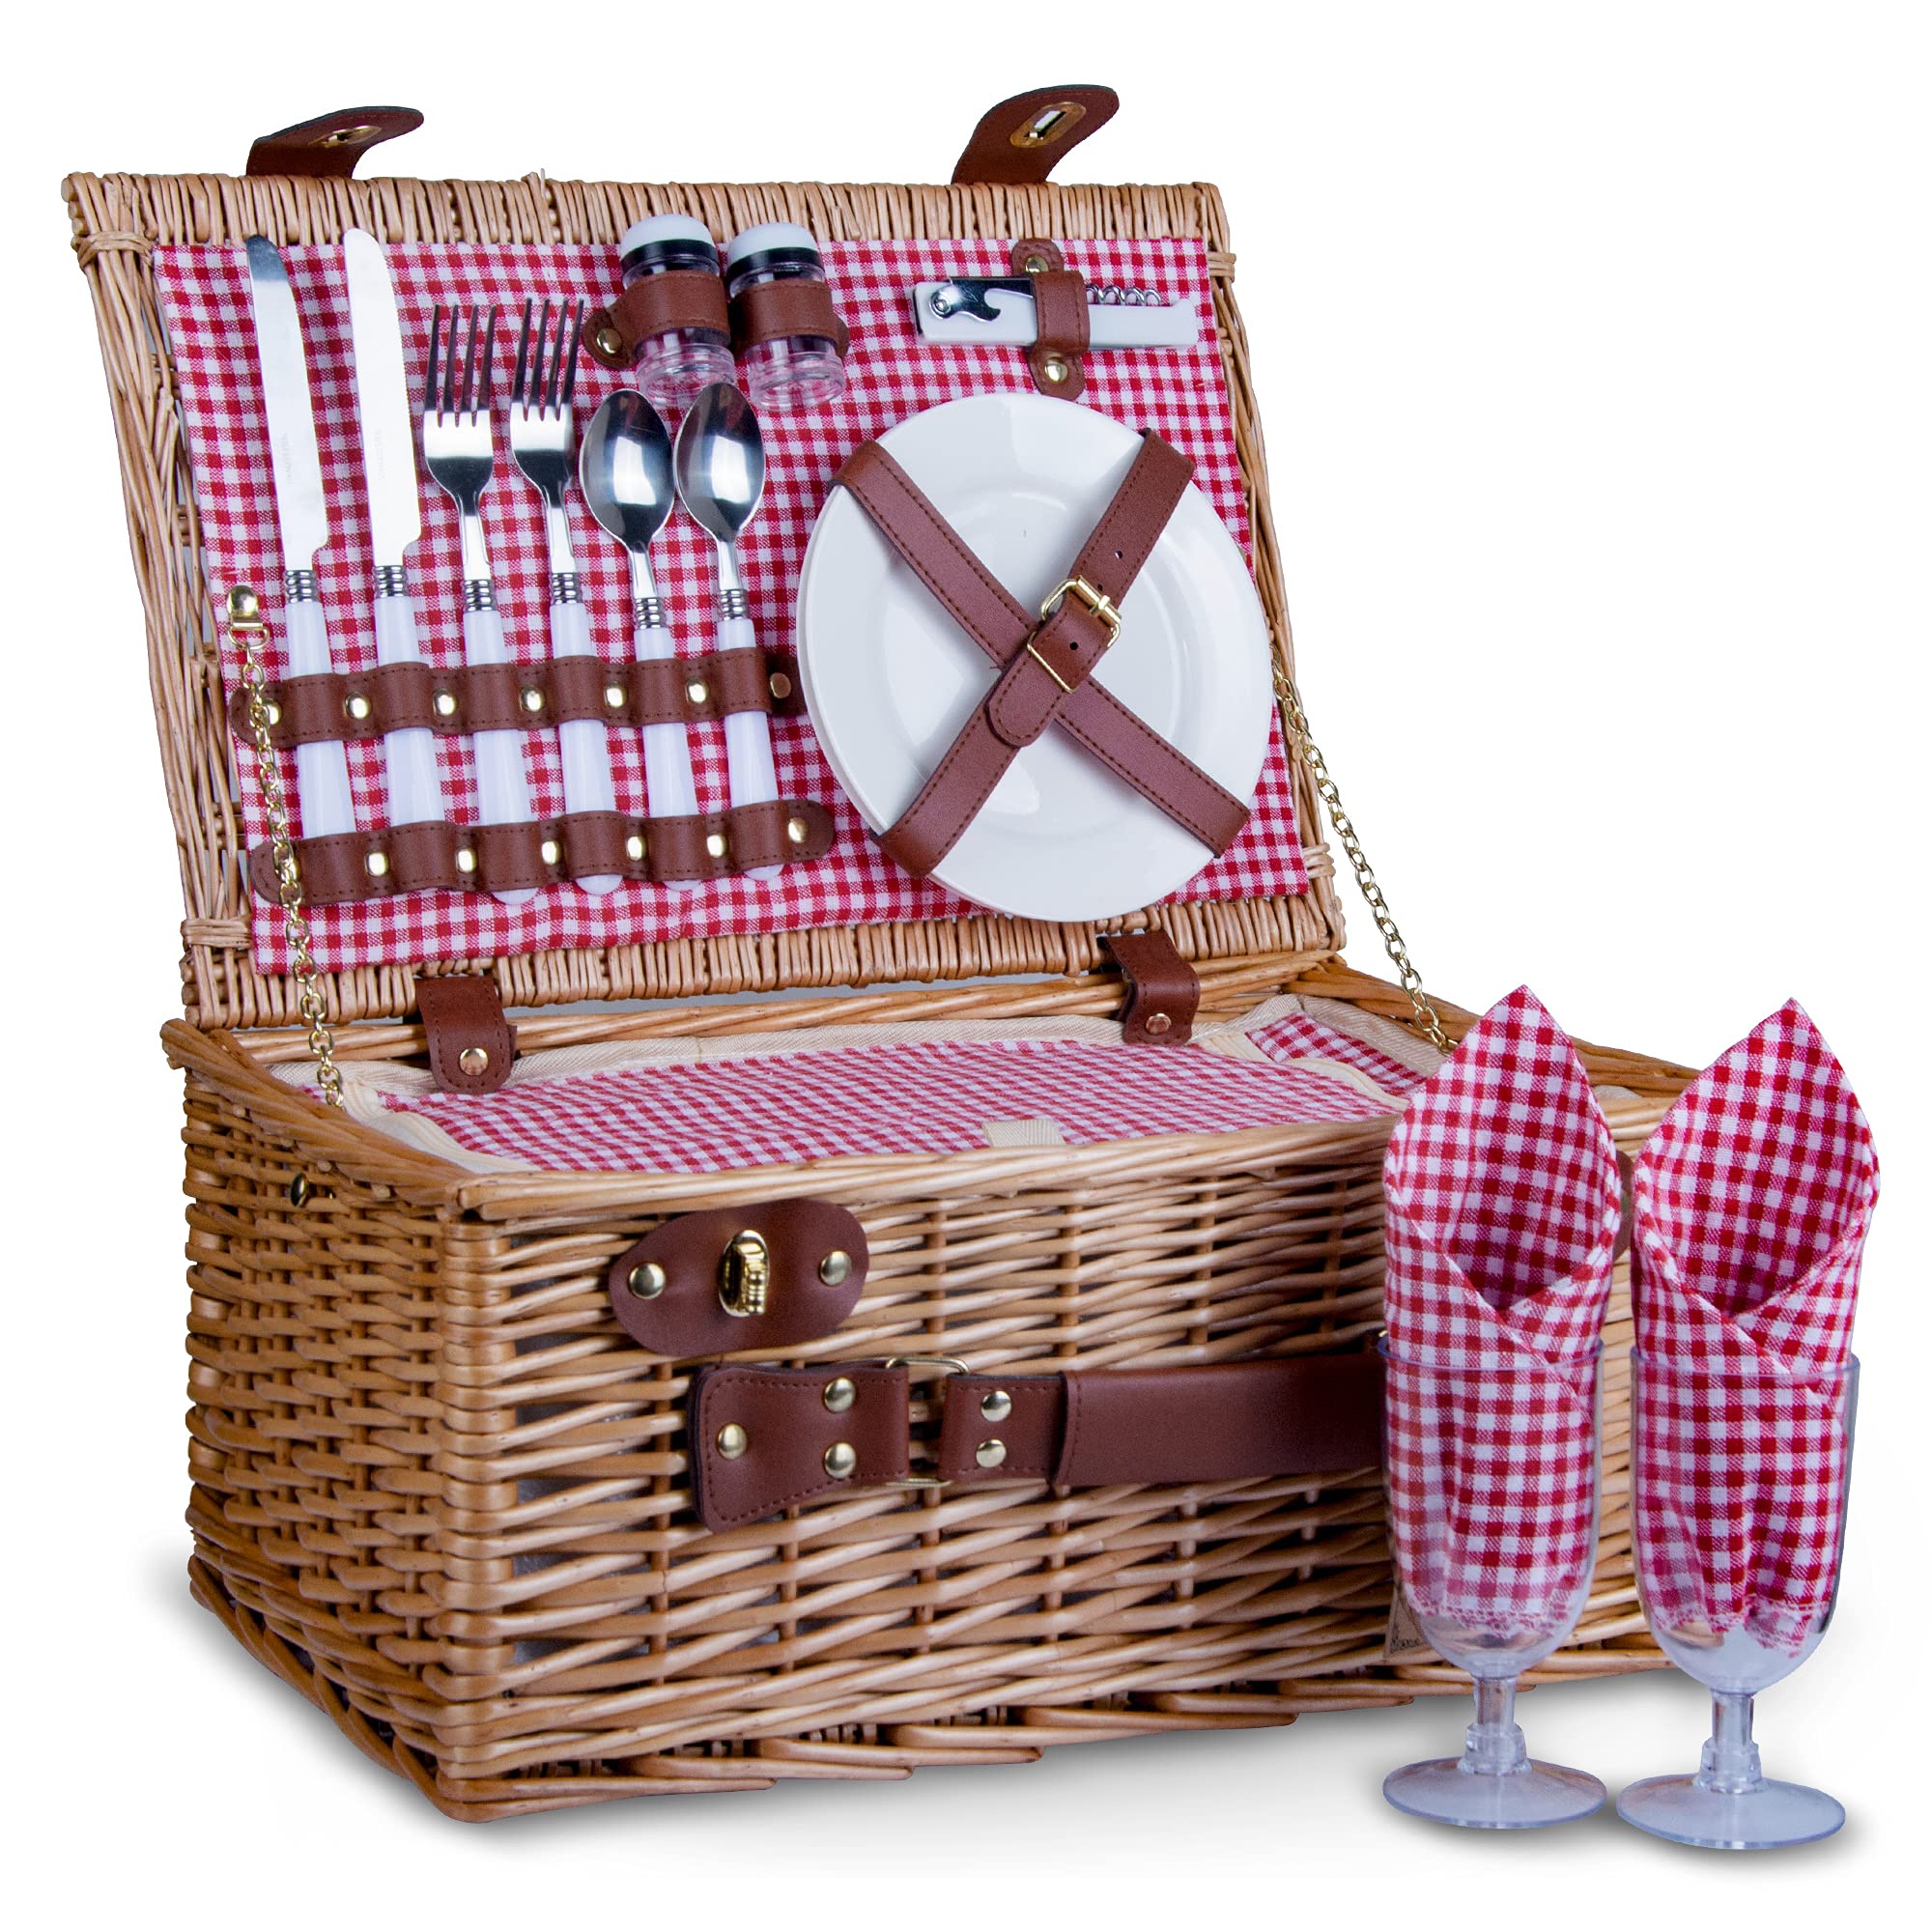 SatisInside 16Pcs Kit Deluxe 2 Person Insulated Wicker Picnic Basket (Reinforced Handle) - Red Gingham